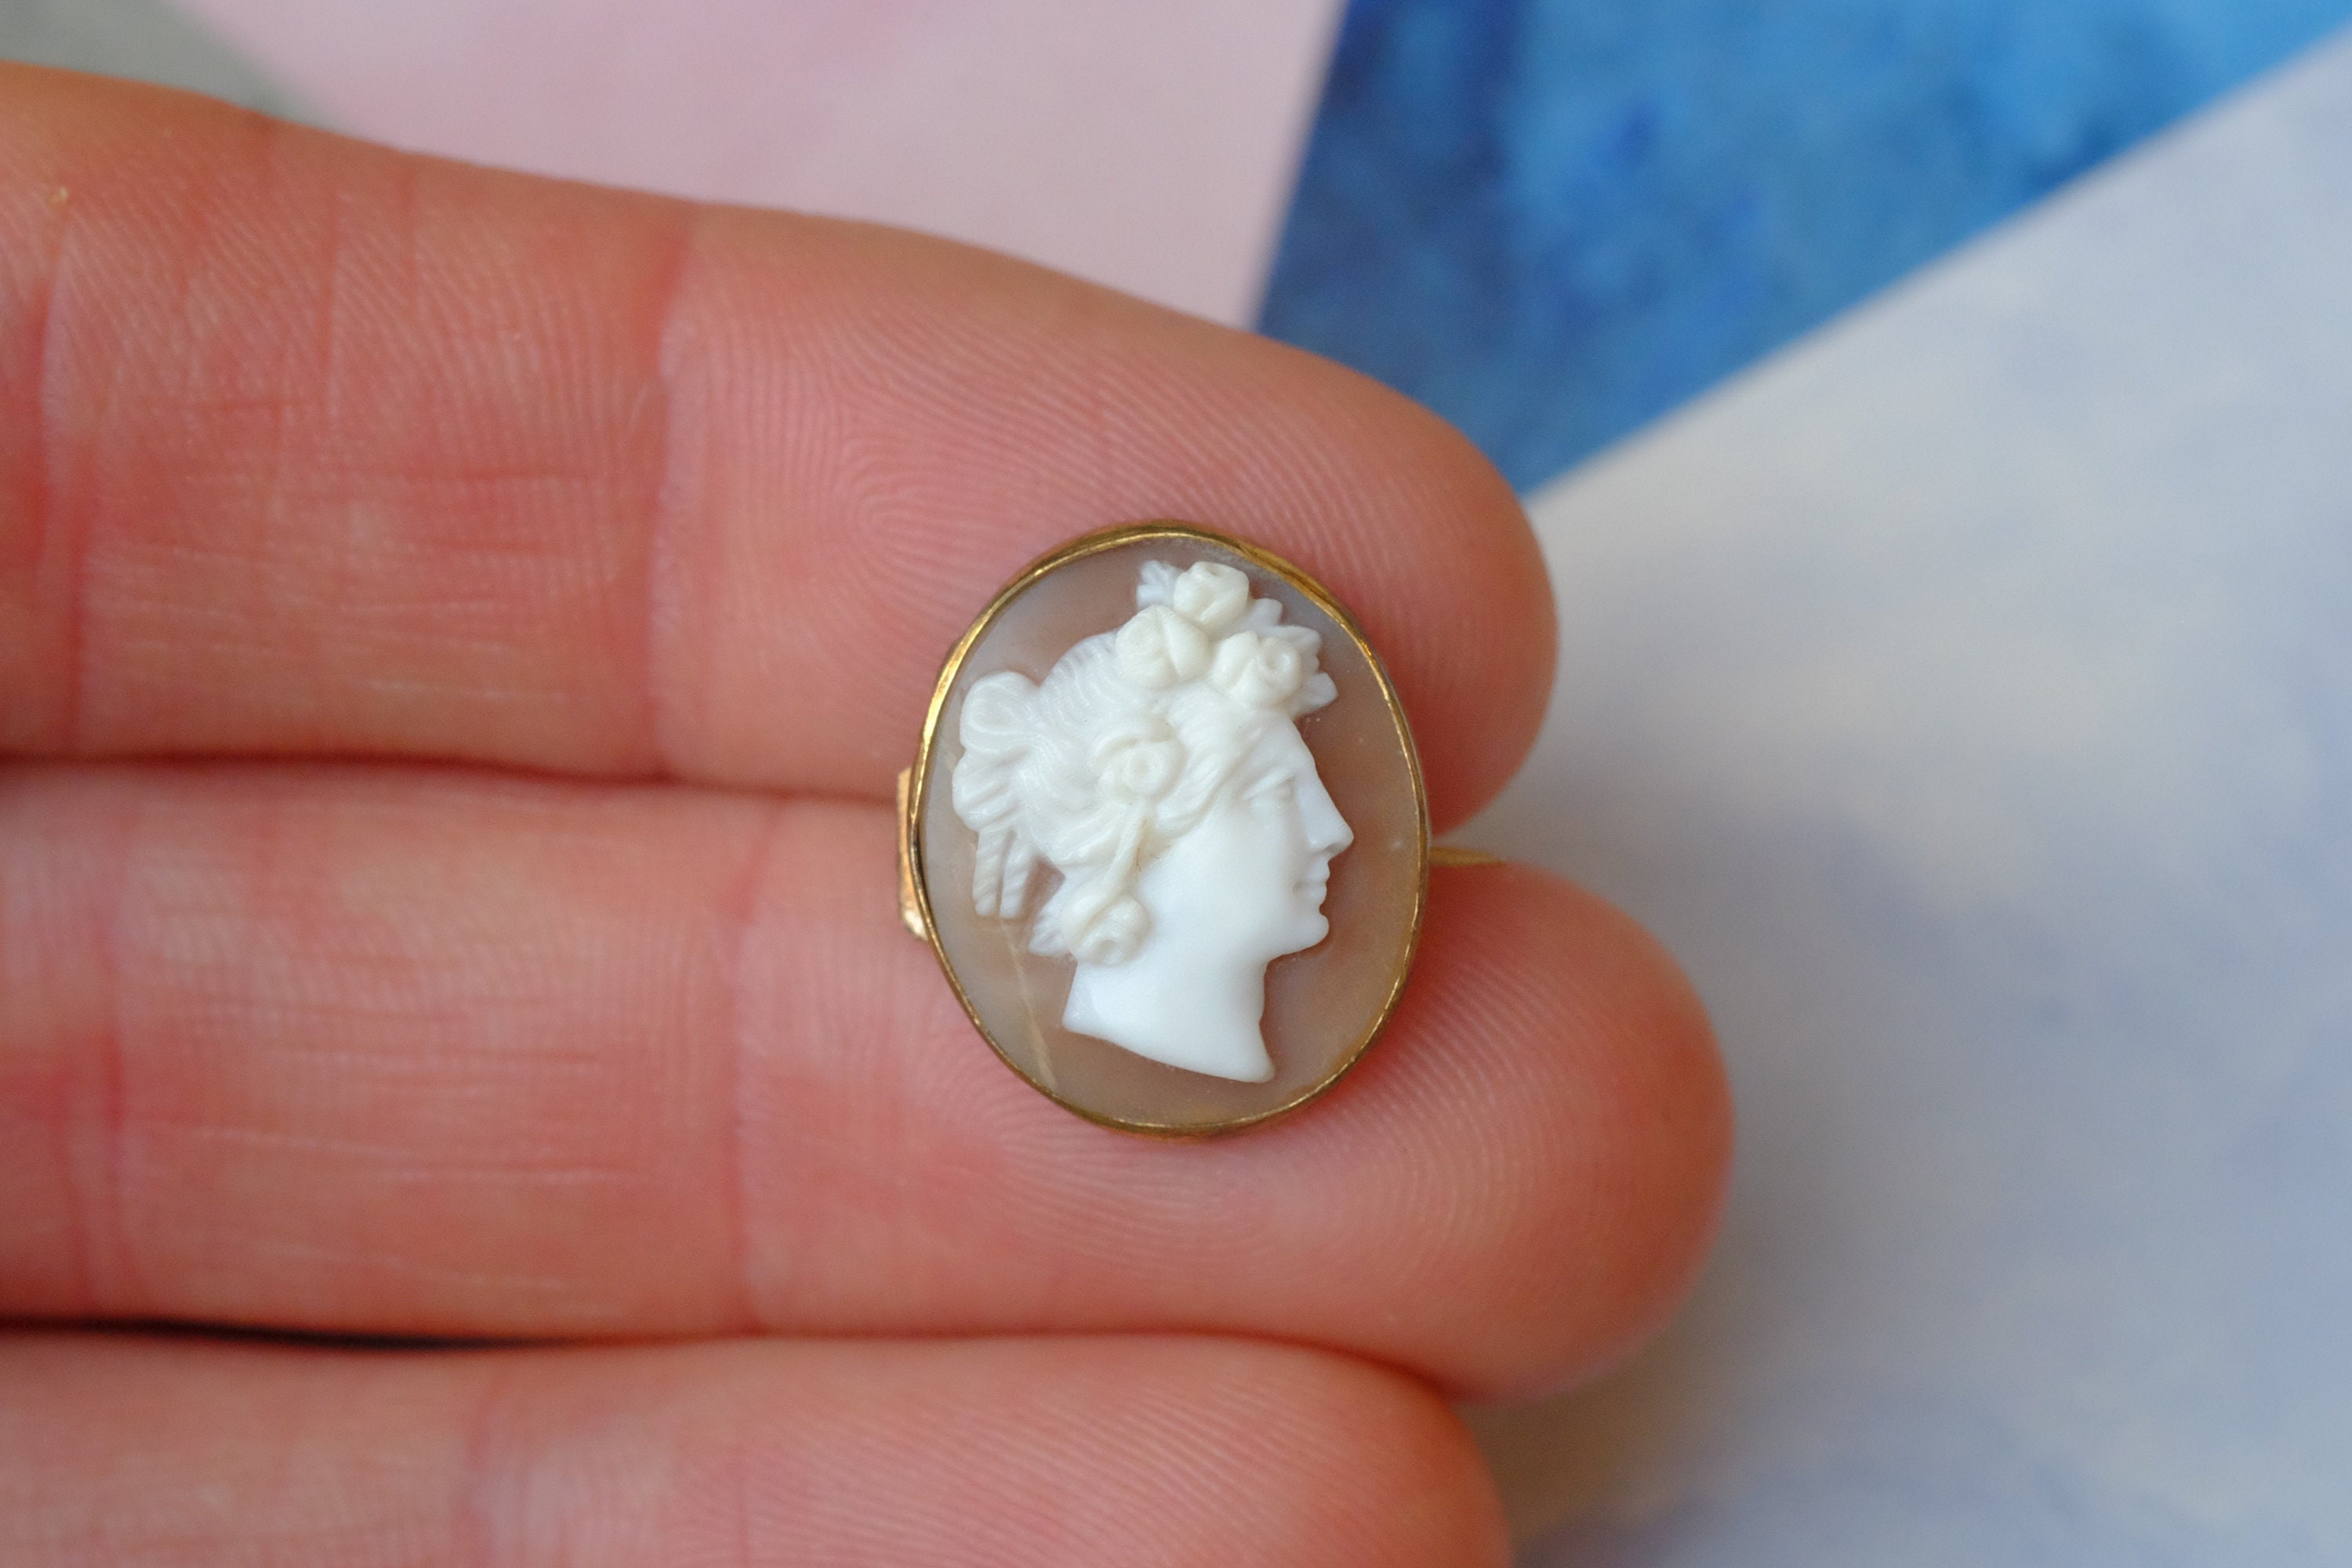 lydiasvintage Victorian Lady Cameo Brooch / Small Pin Steampunk Lover Gift Vintage Wedding Bridesmaid Favors Costume Brooch Bouquet Boutineer on A Budget